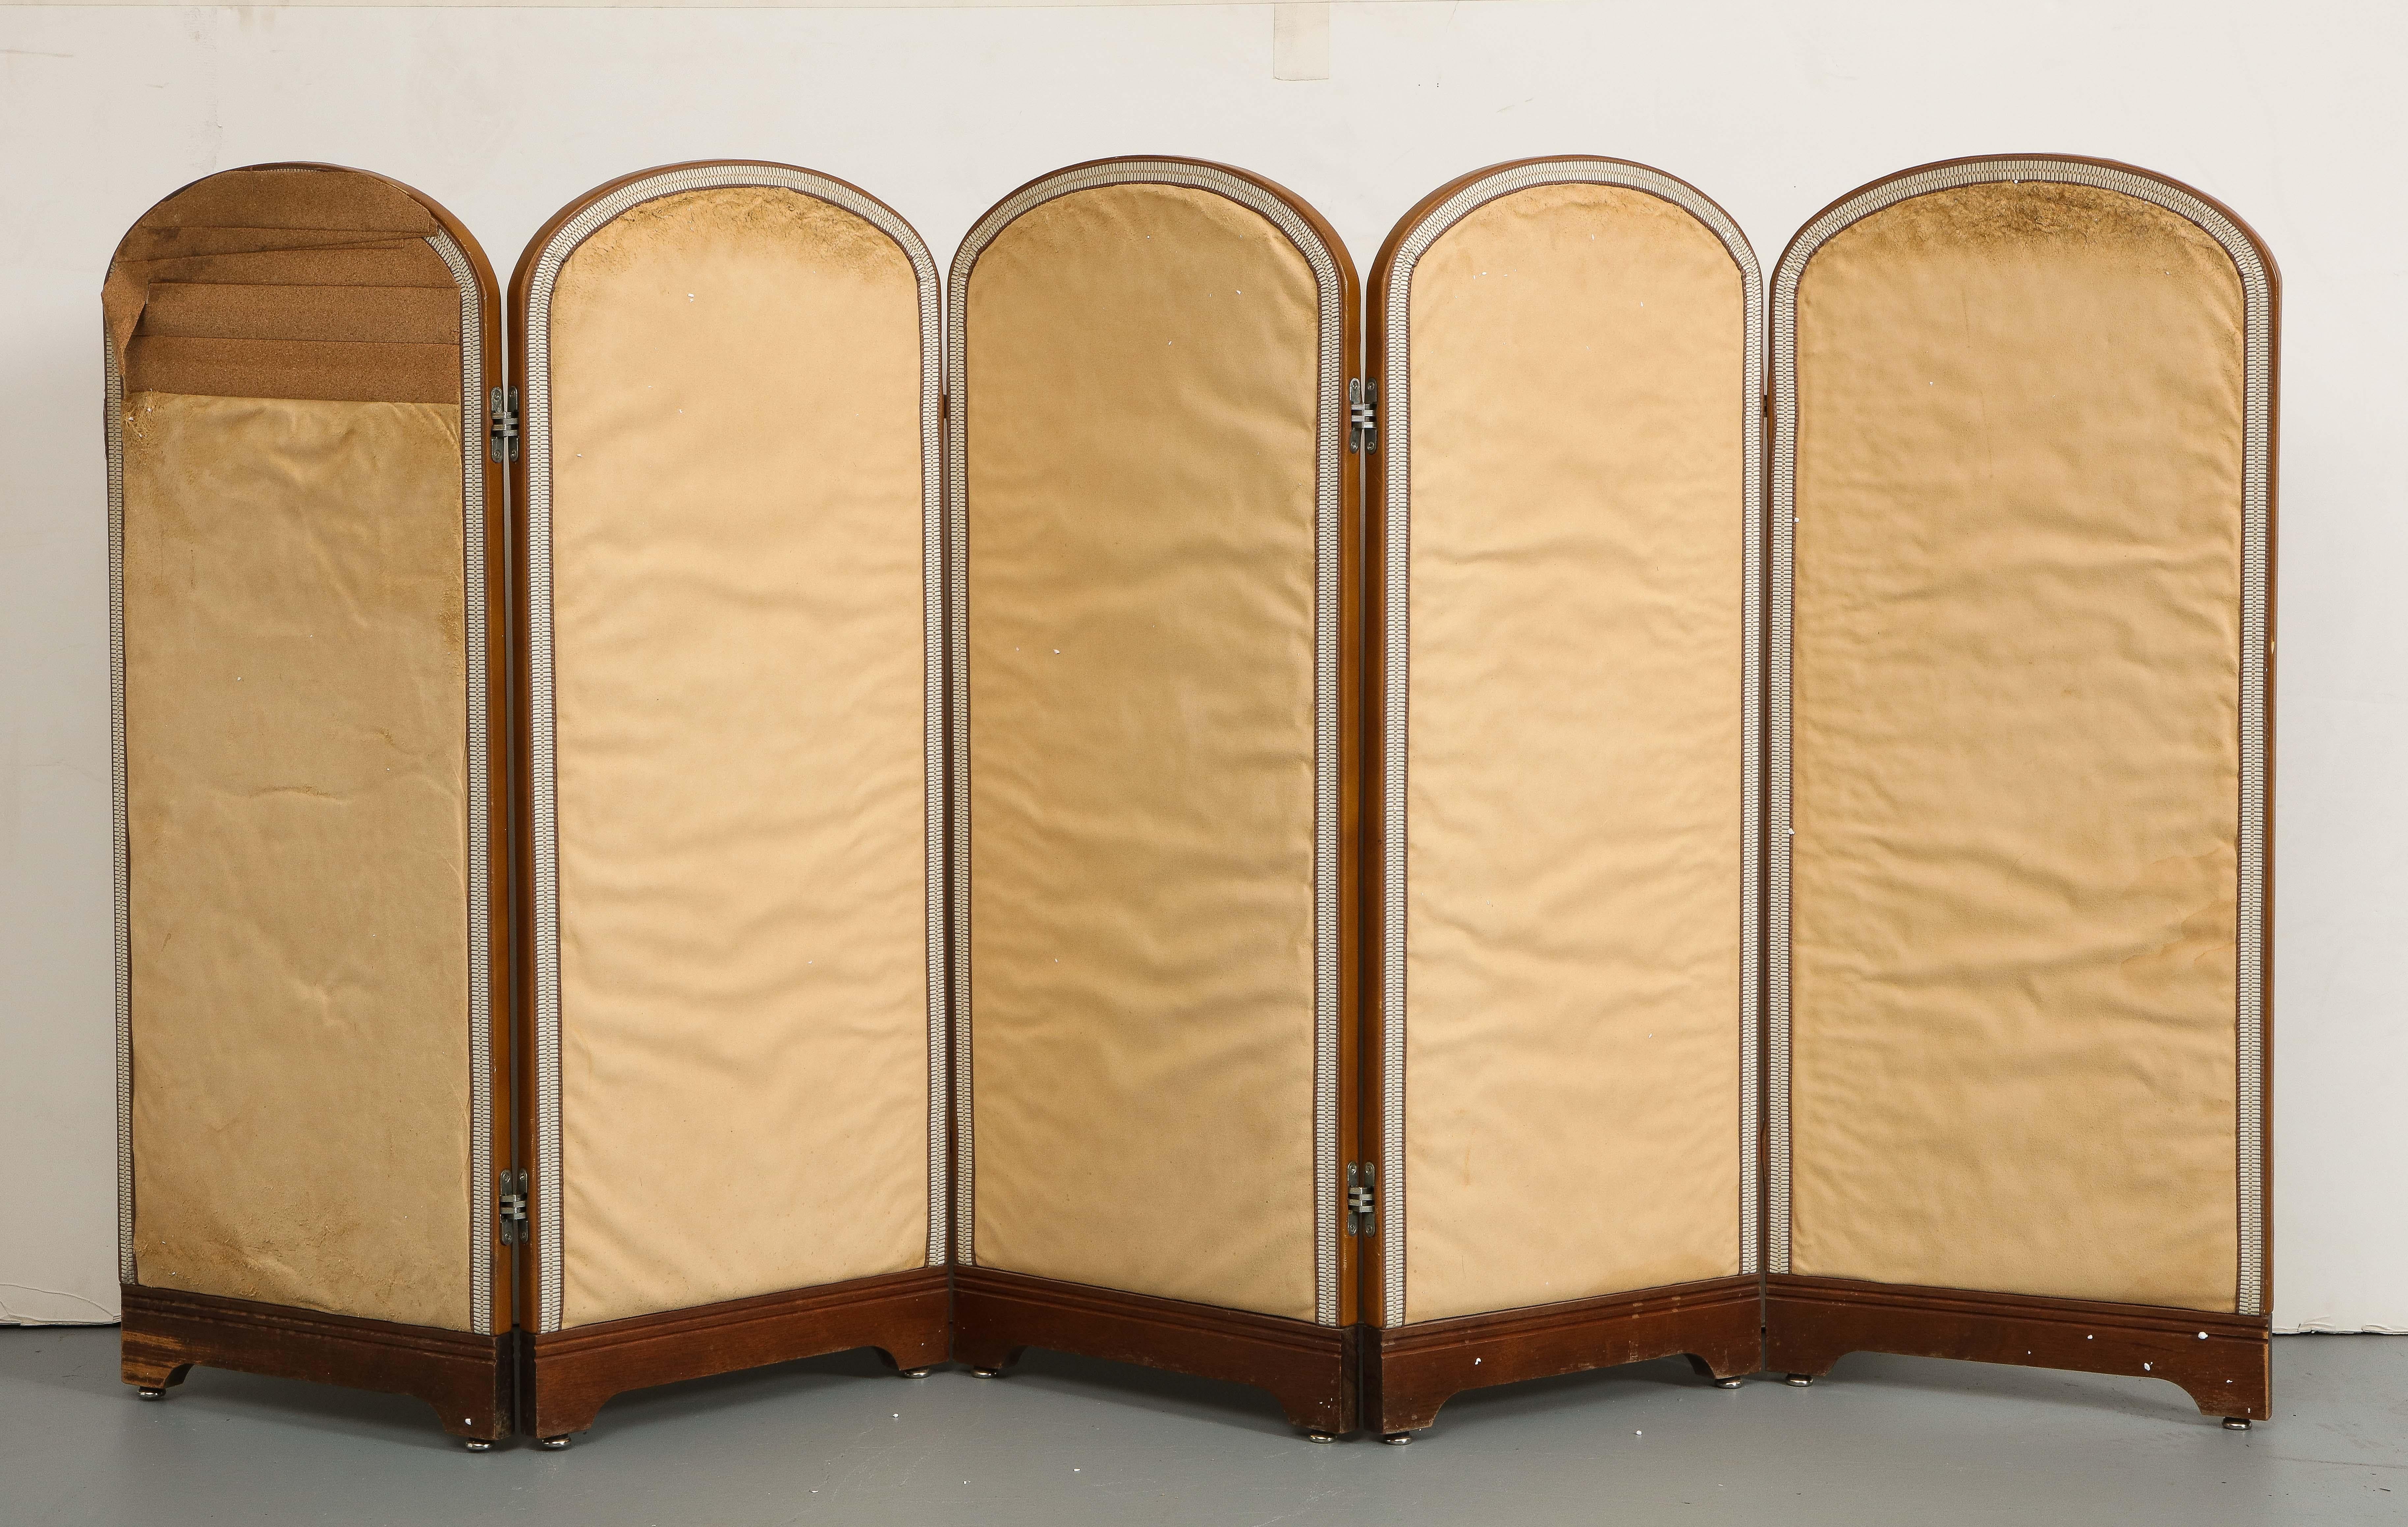 Vintage Leather Folding Screen with 5 Panels, C. 1960 For Sale 10